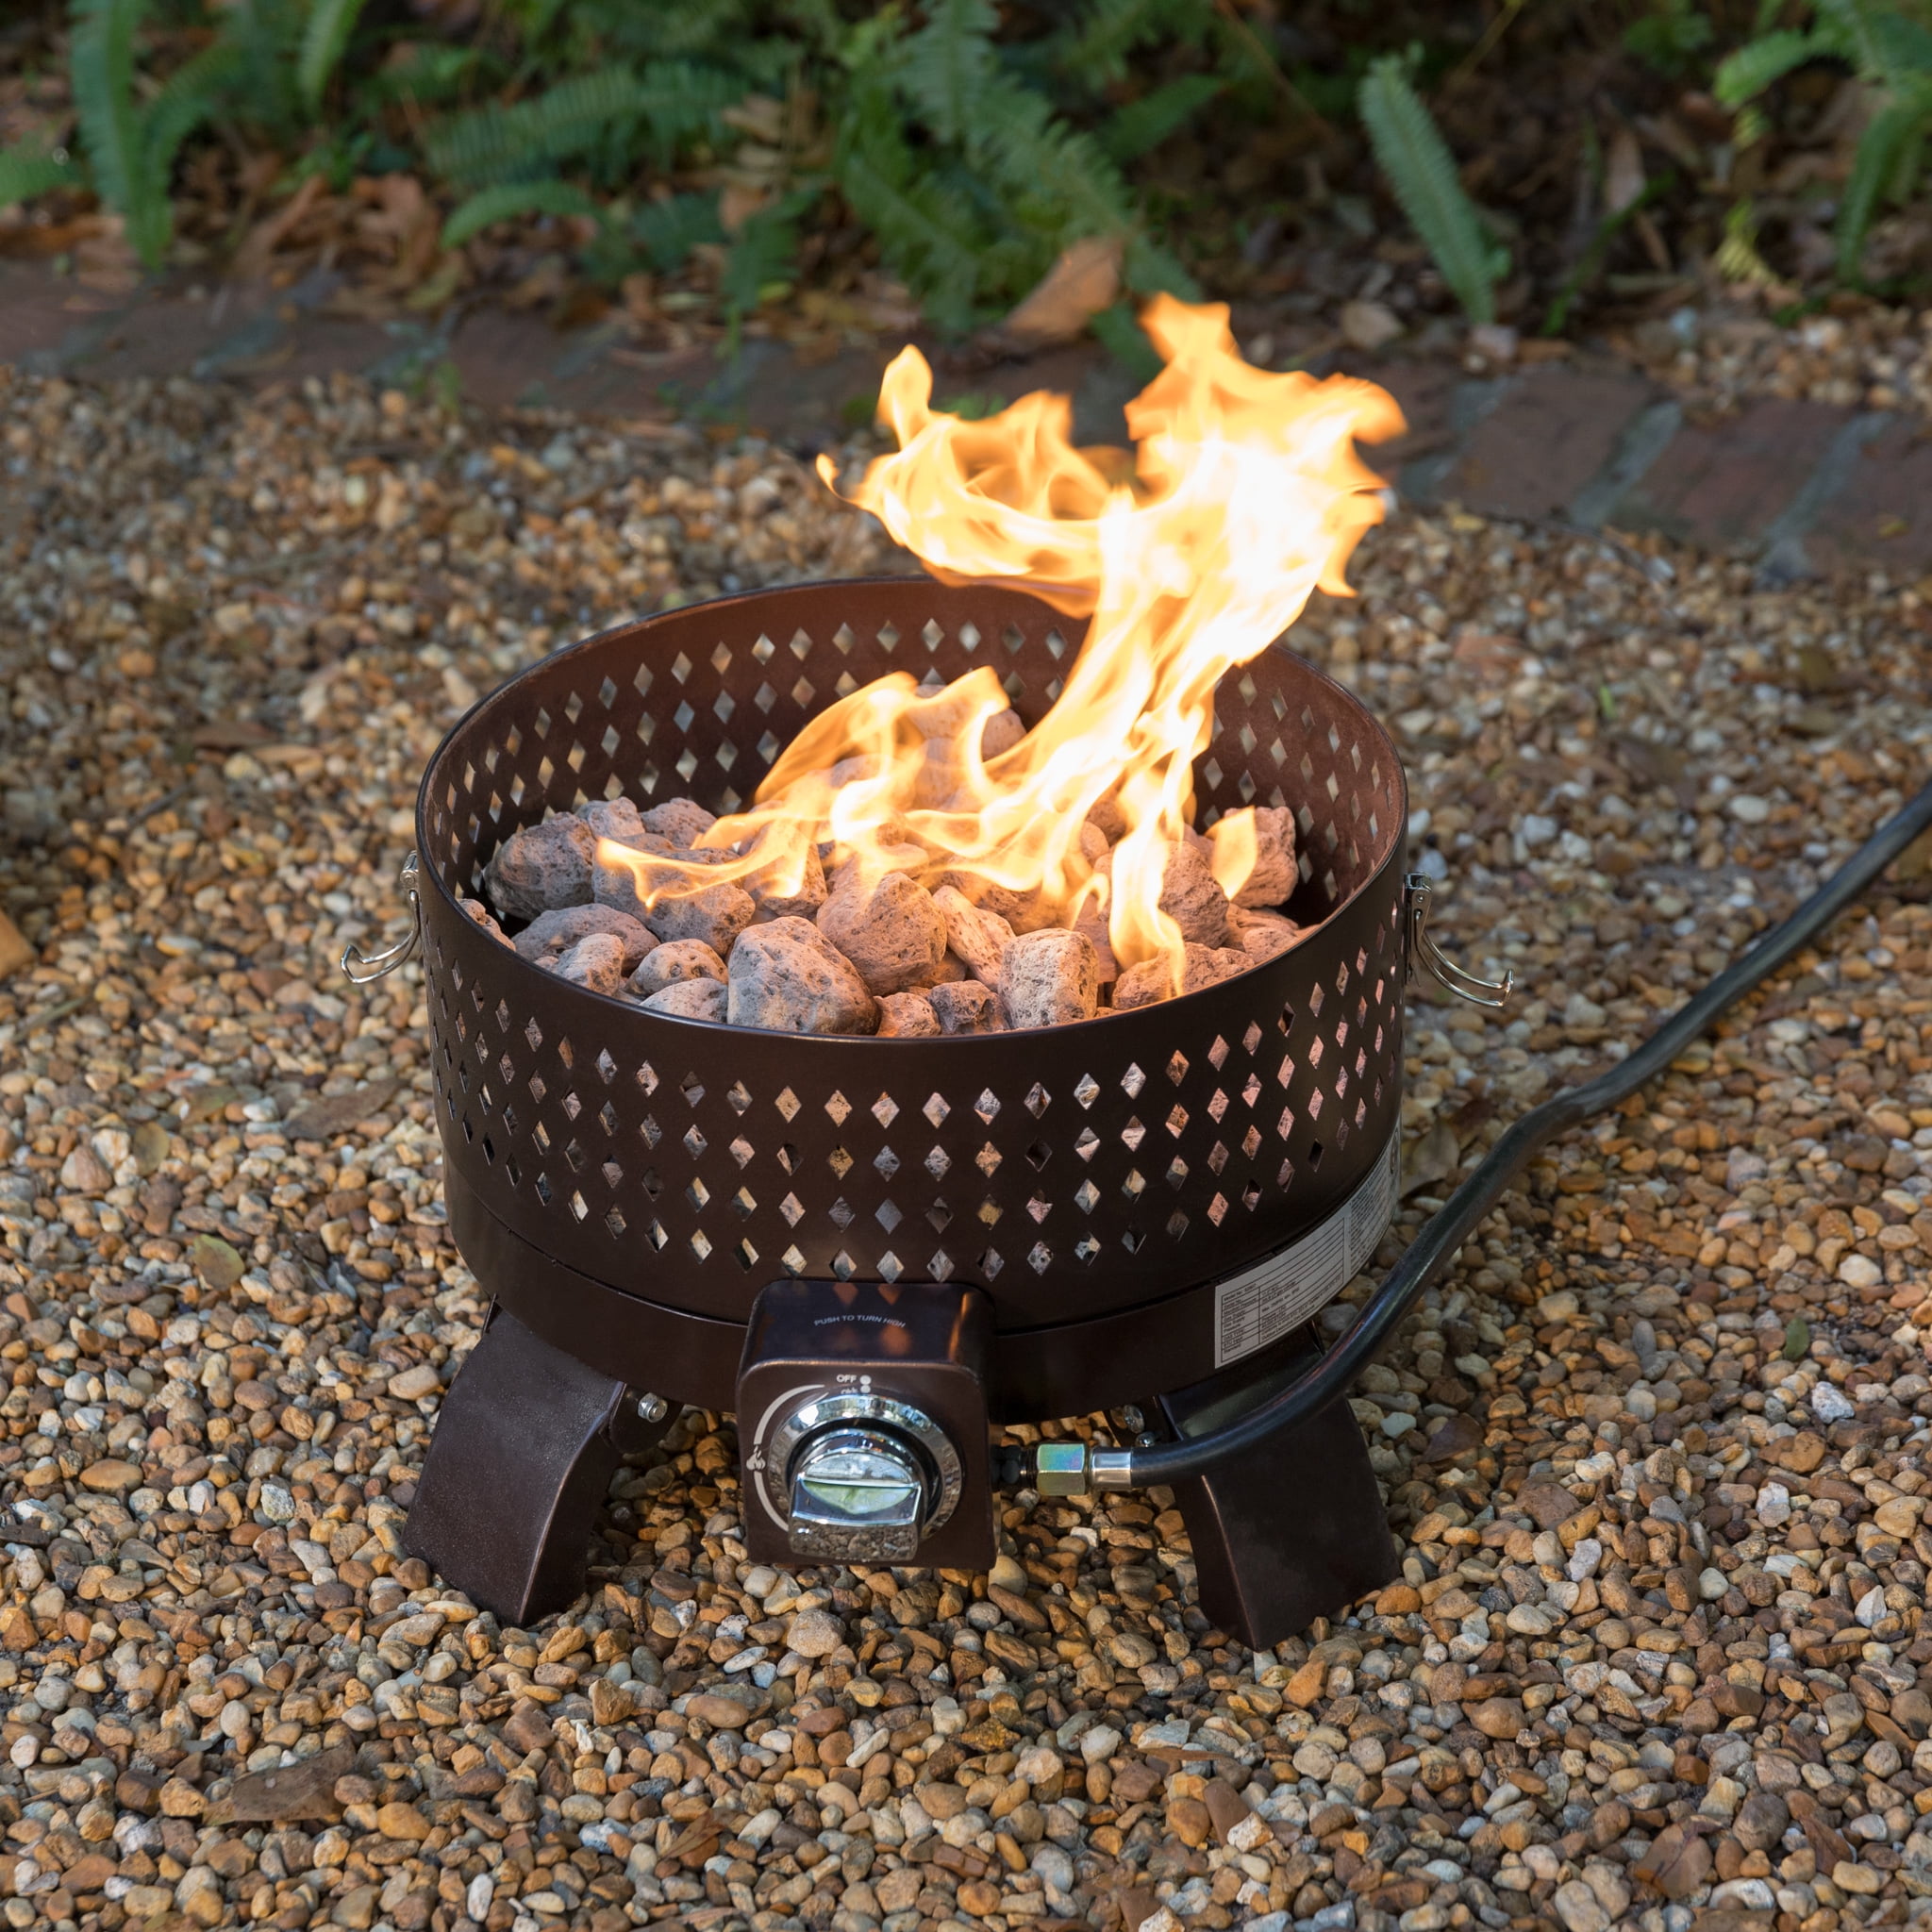 Fire Sense 60 000 Btu Outdoor Portable Propane Gas Steel Fire Pit With Carrying Bag And Lava Rock Walmart Com